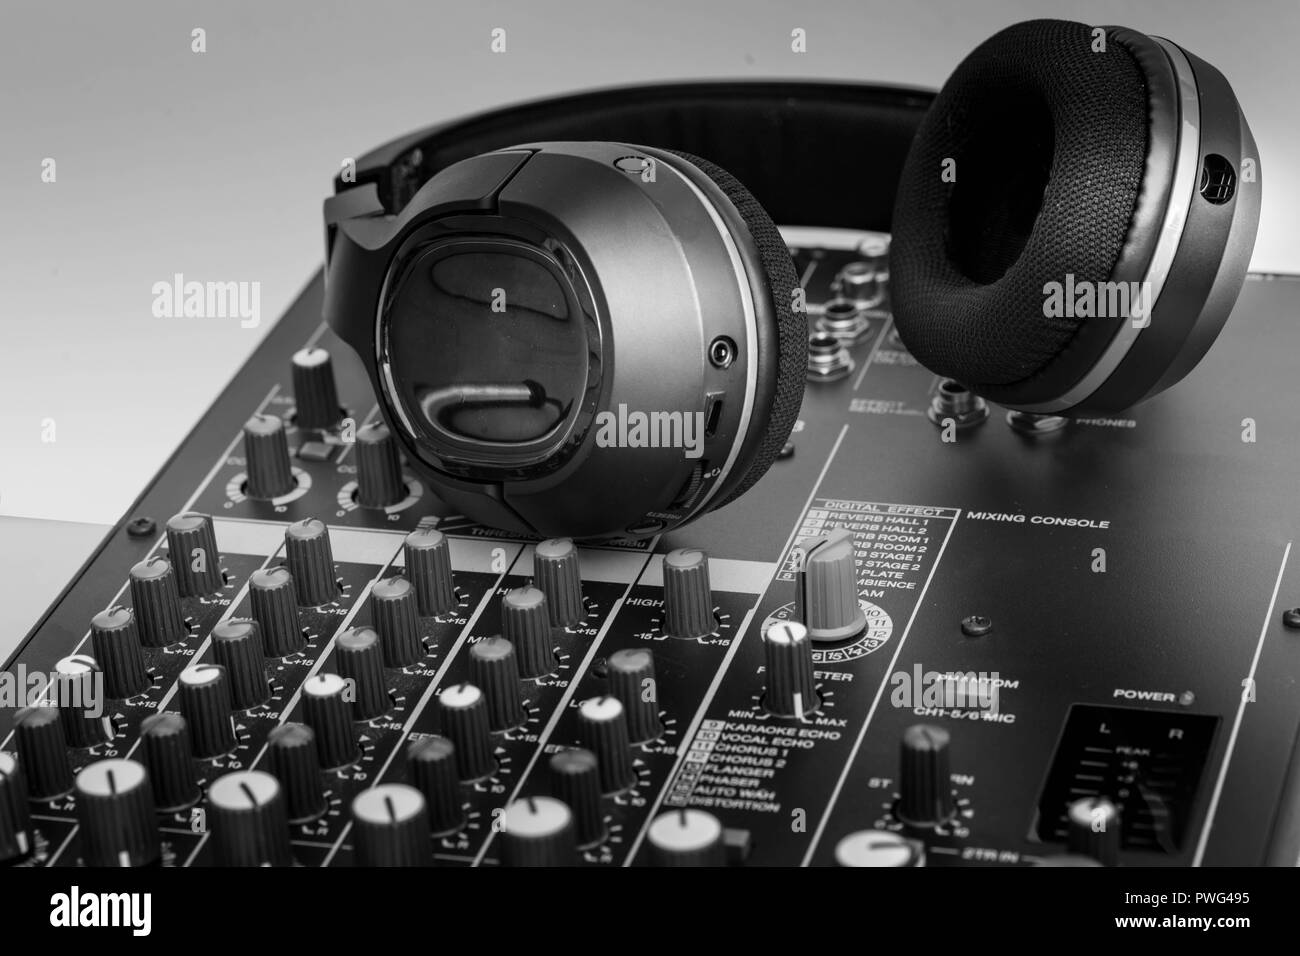 Sound studio mixing desk and mic in Black and white. Stock Photo